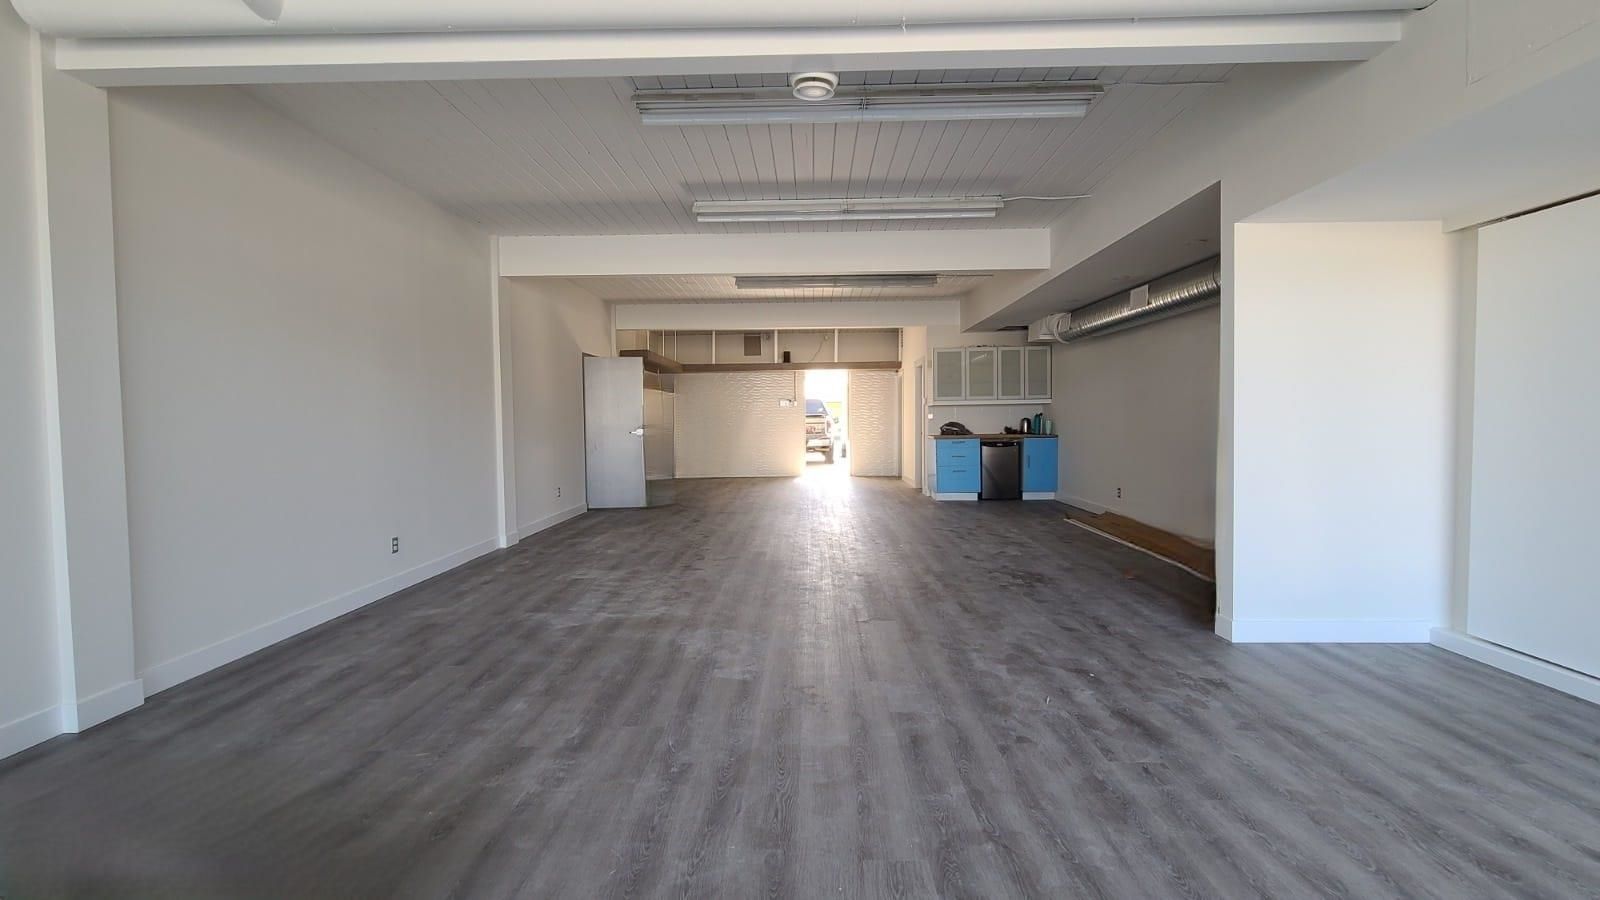 Main Photo: 7191 HORNE Street: Office for lease in Mission: MLS®# C8046640